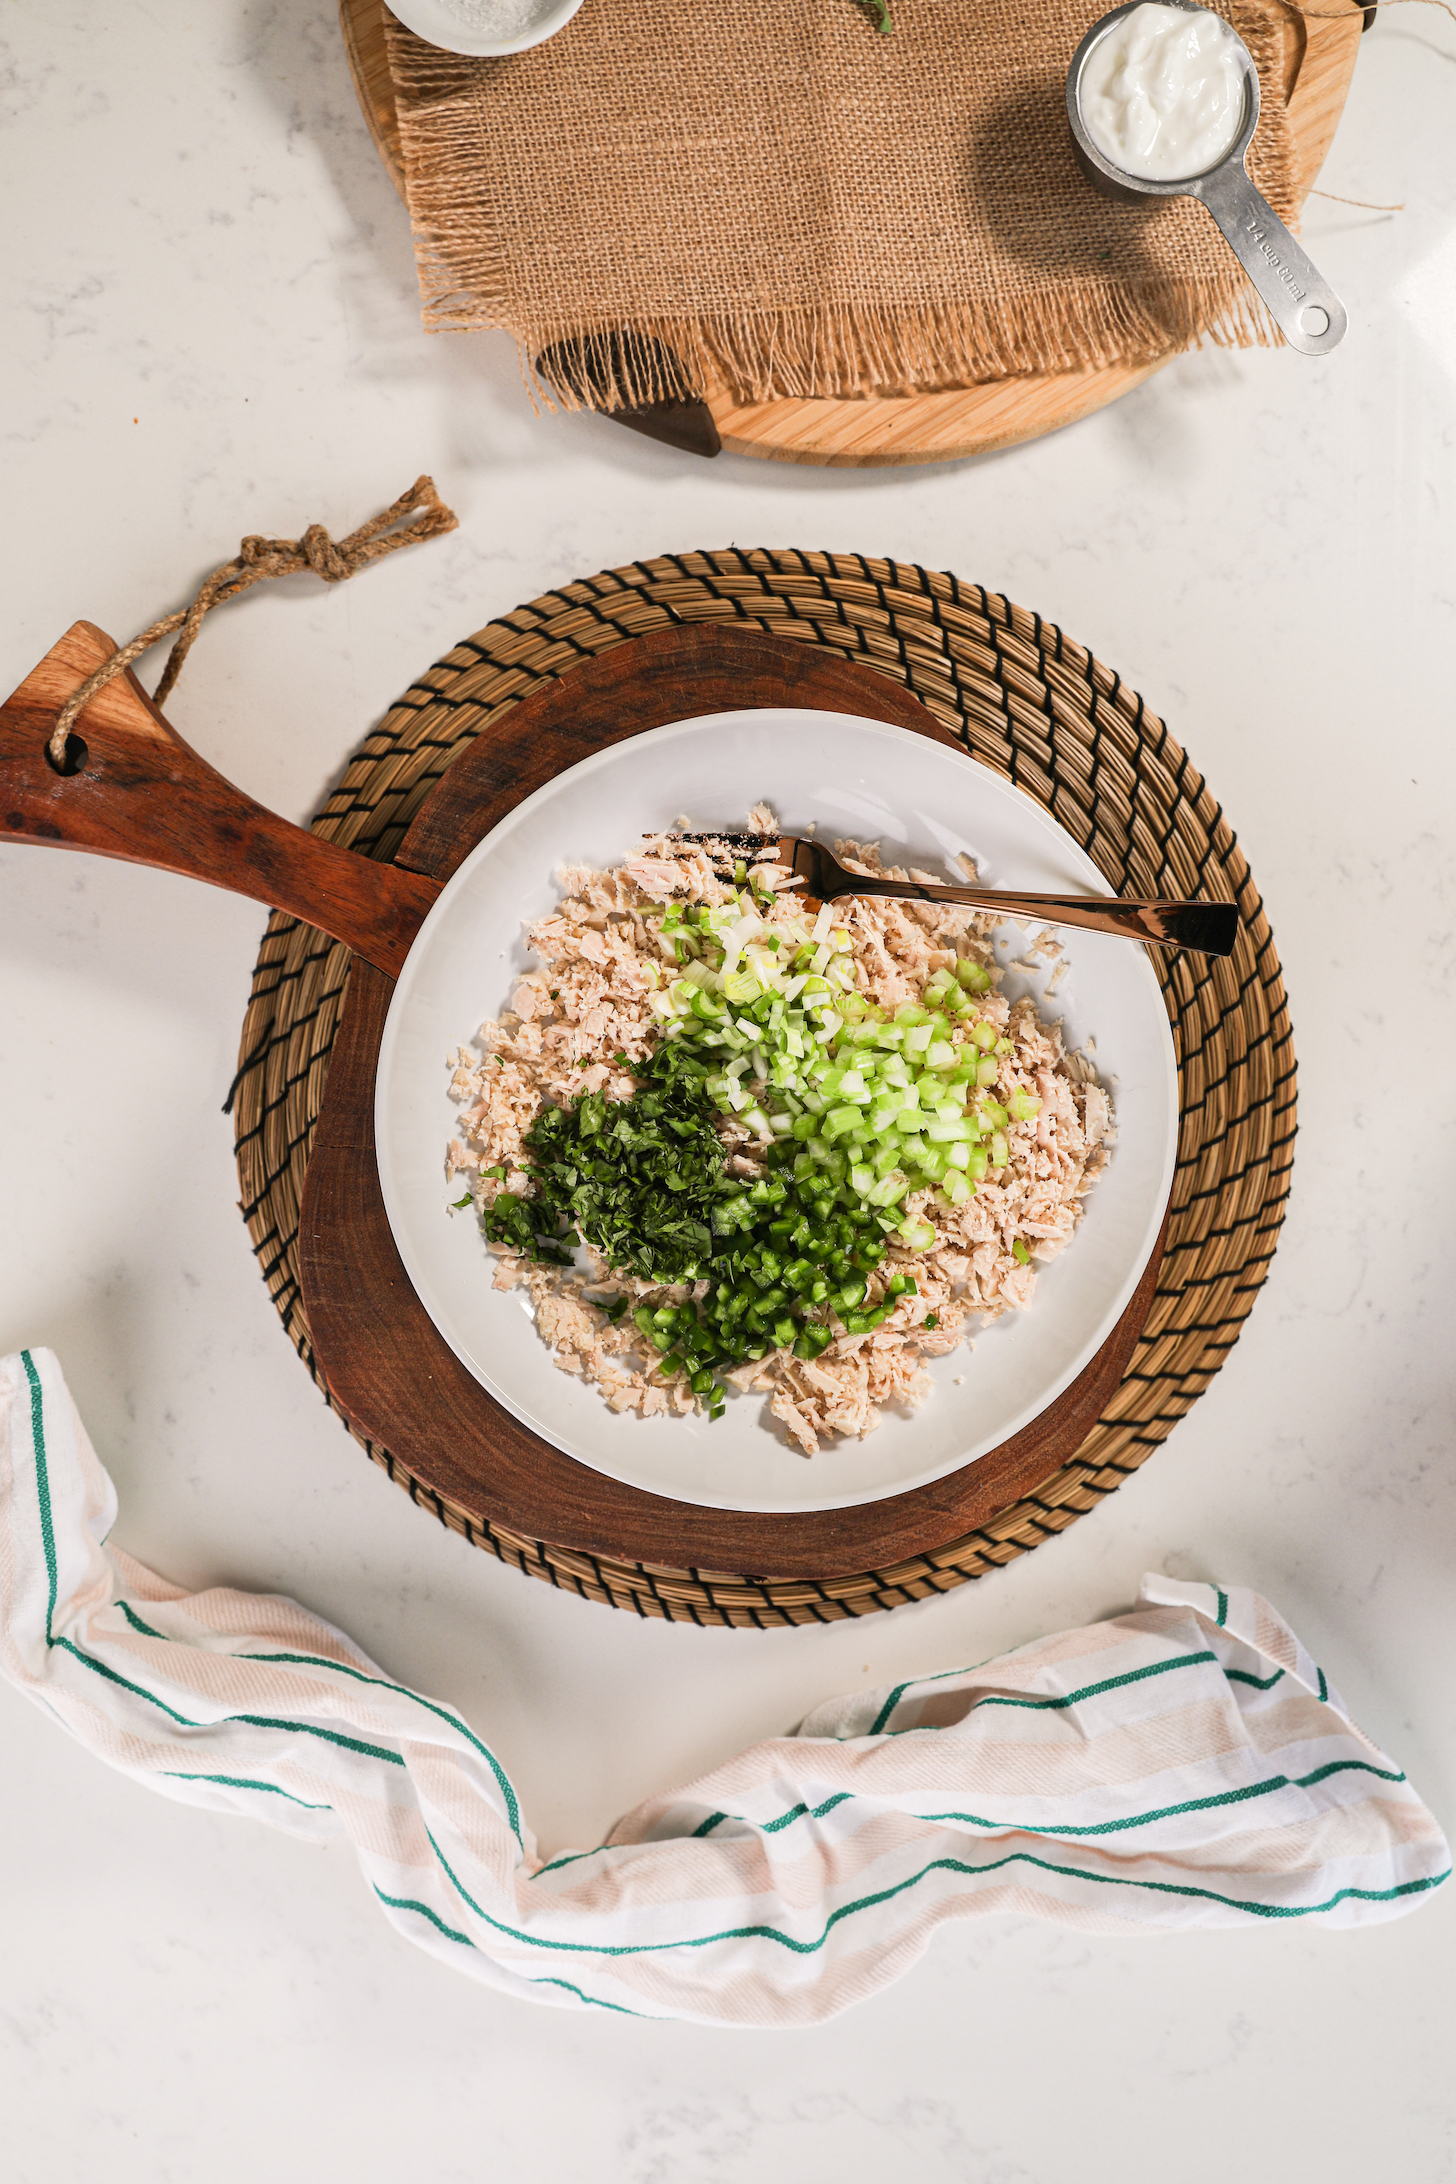 A birdseye view of a bowl of shredded fish topped with chopped celery and herbs.